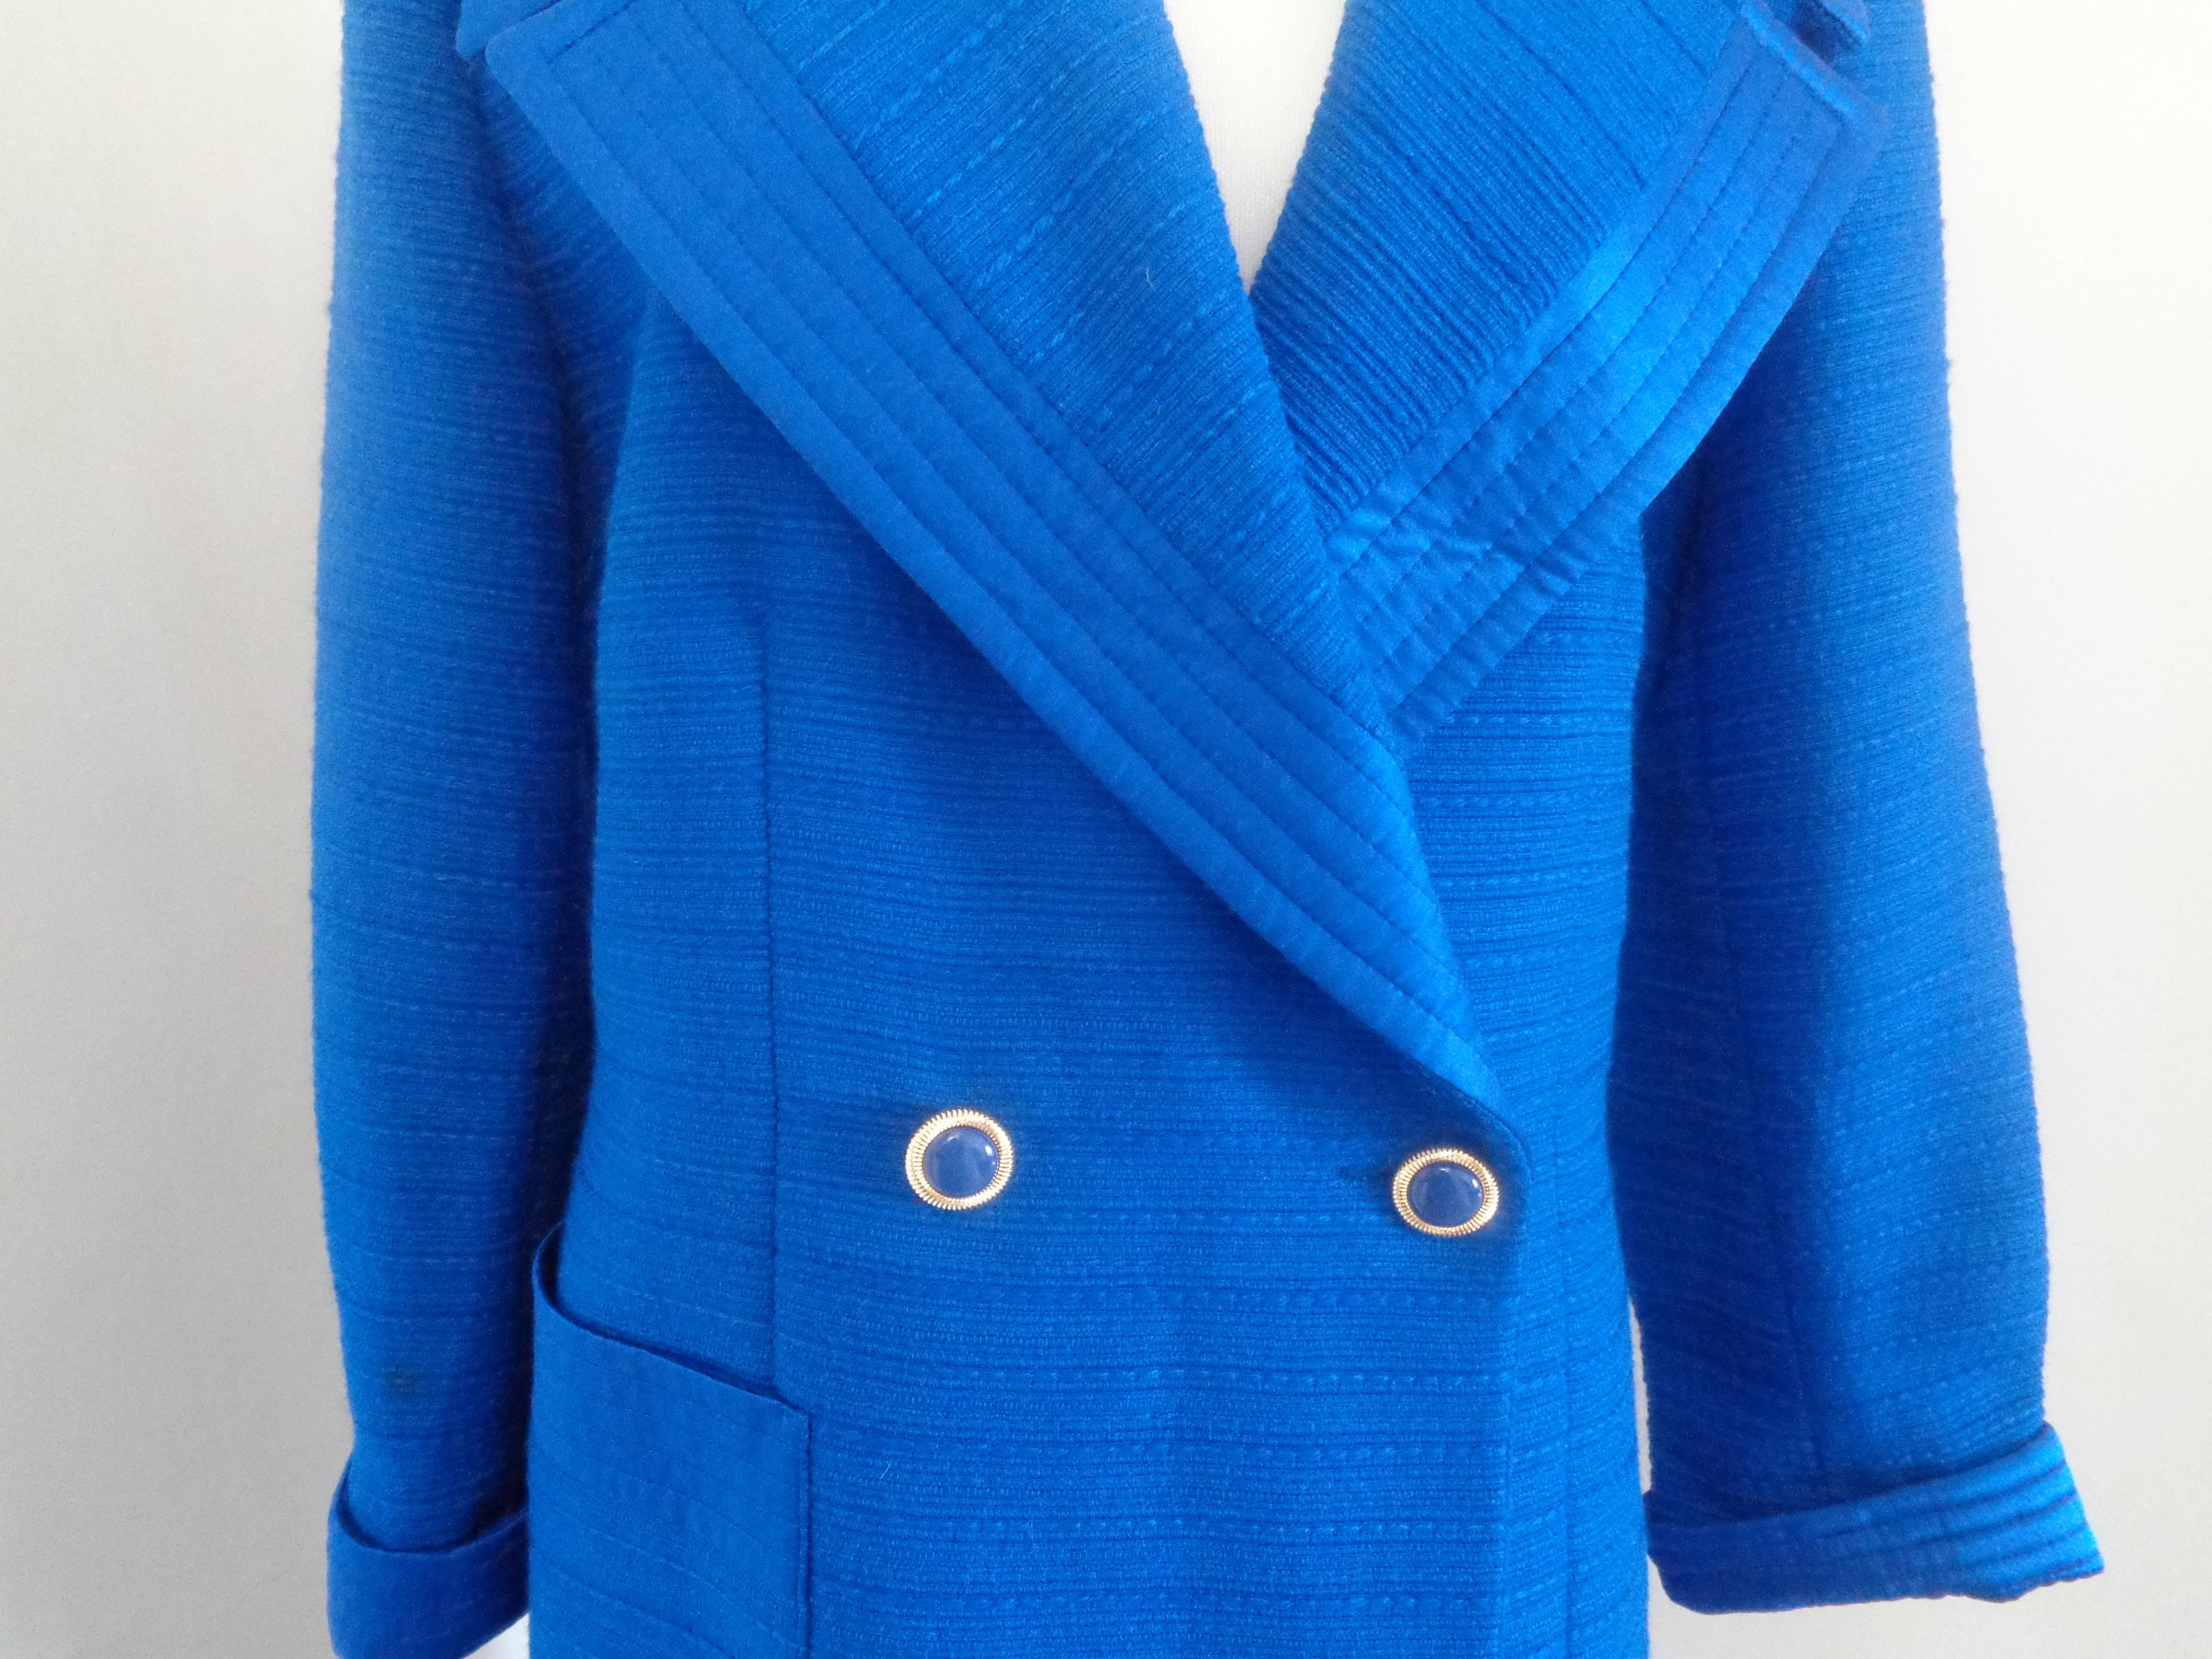 Valentino Blu Wool Skirt suit

Totally made in italy in italian size range 46